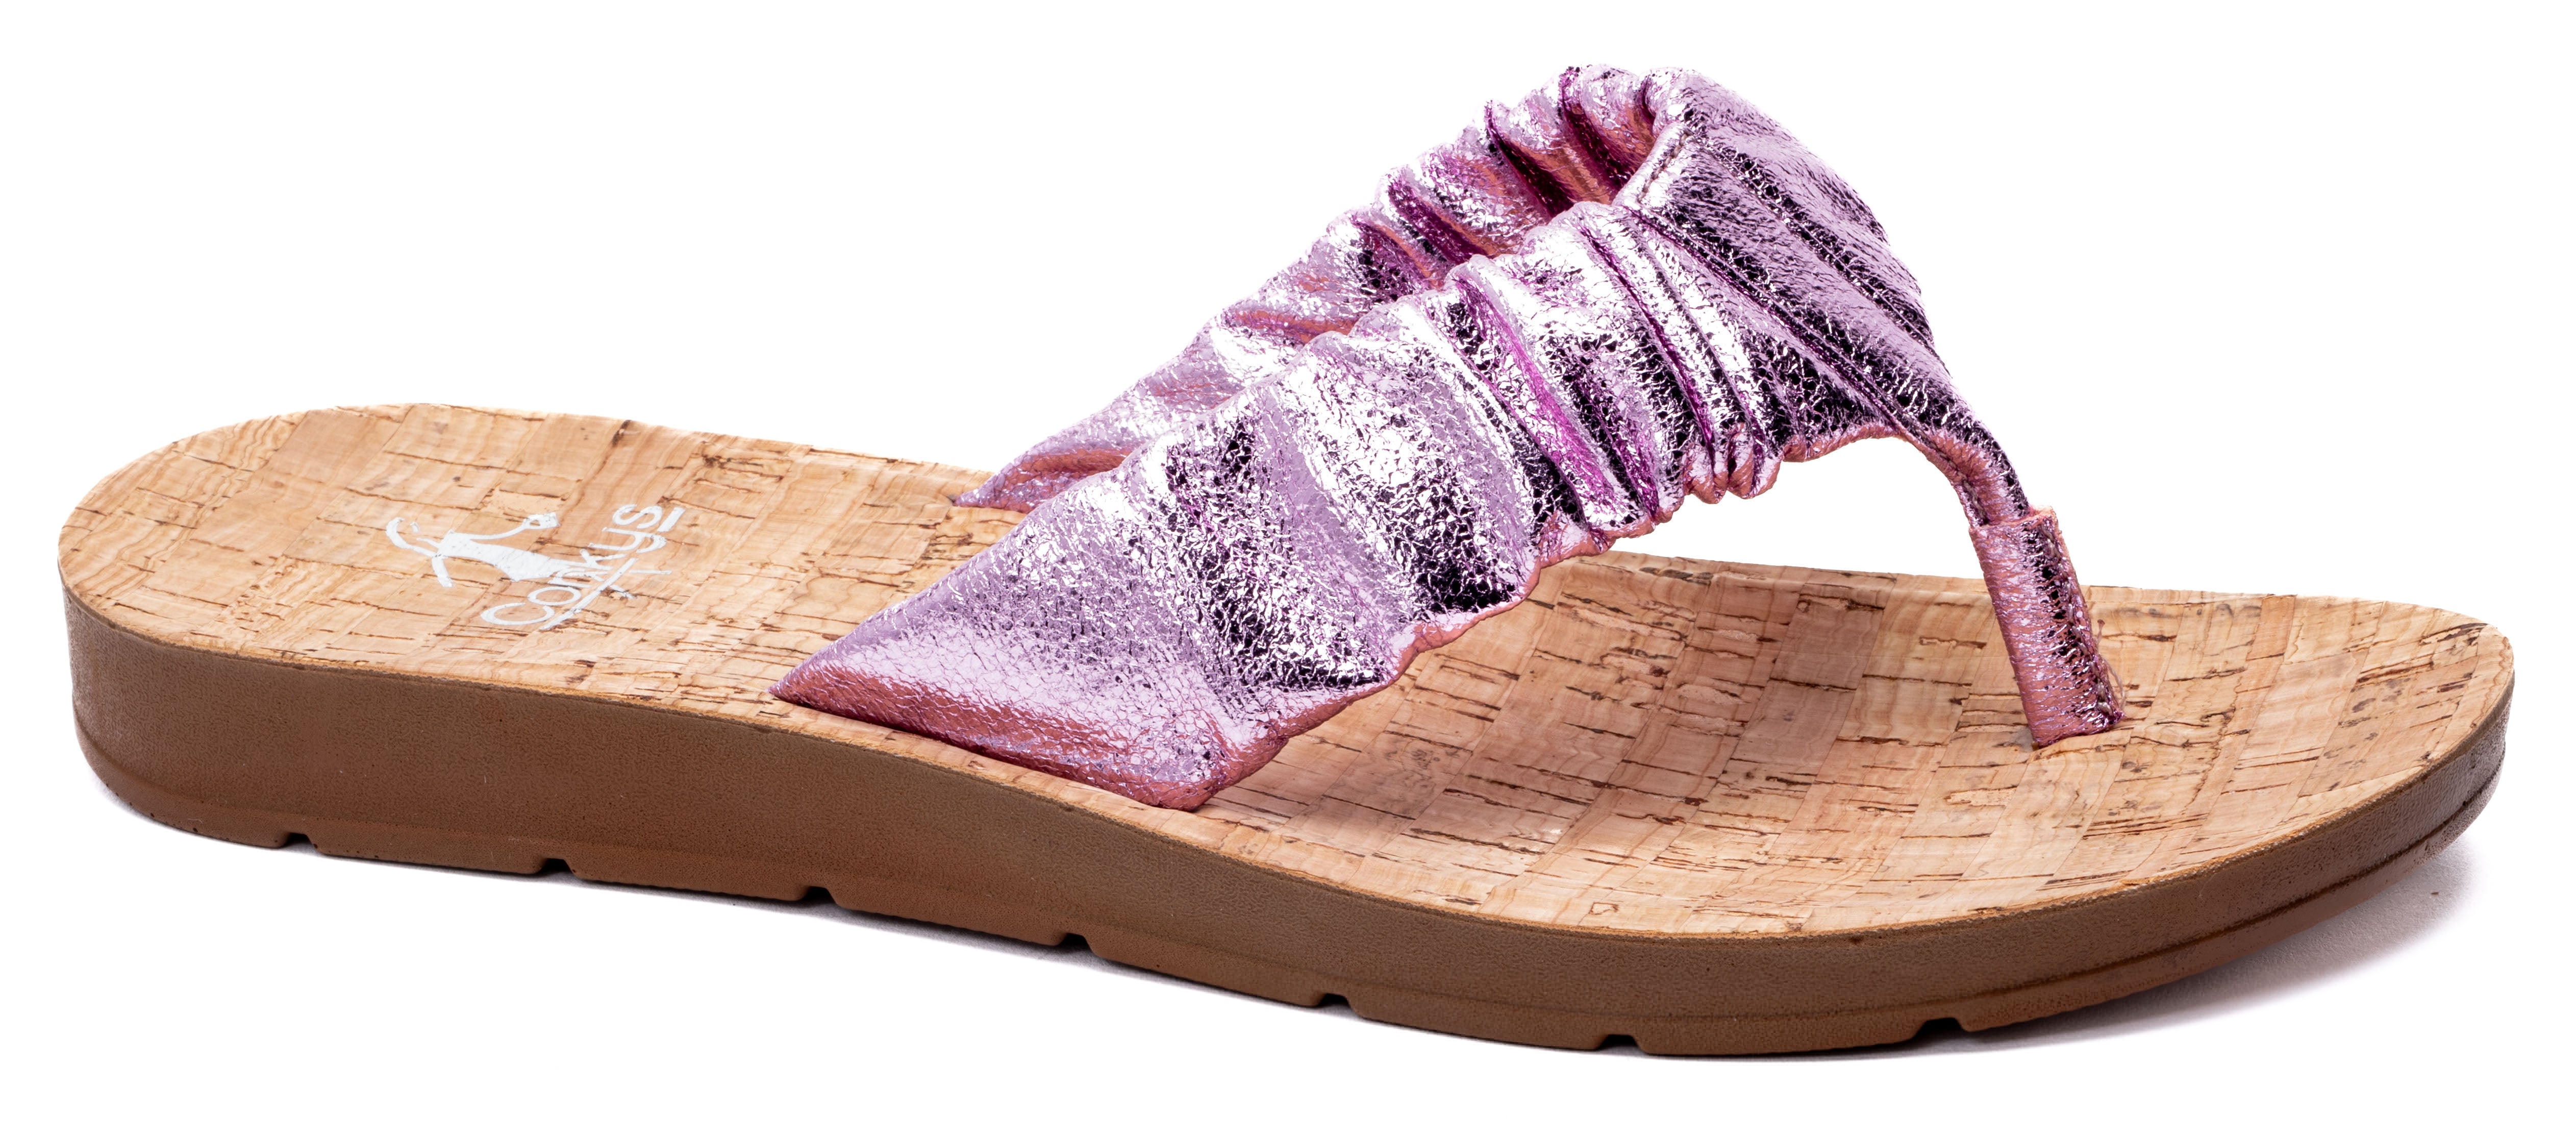 Market Live Preorder: Cool Off Sandal by Corky’s (Ships in 2-3 Weeks)